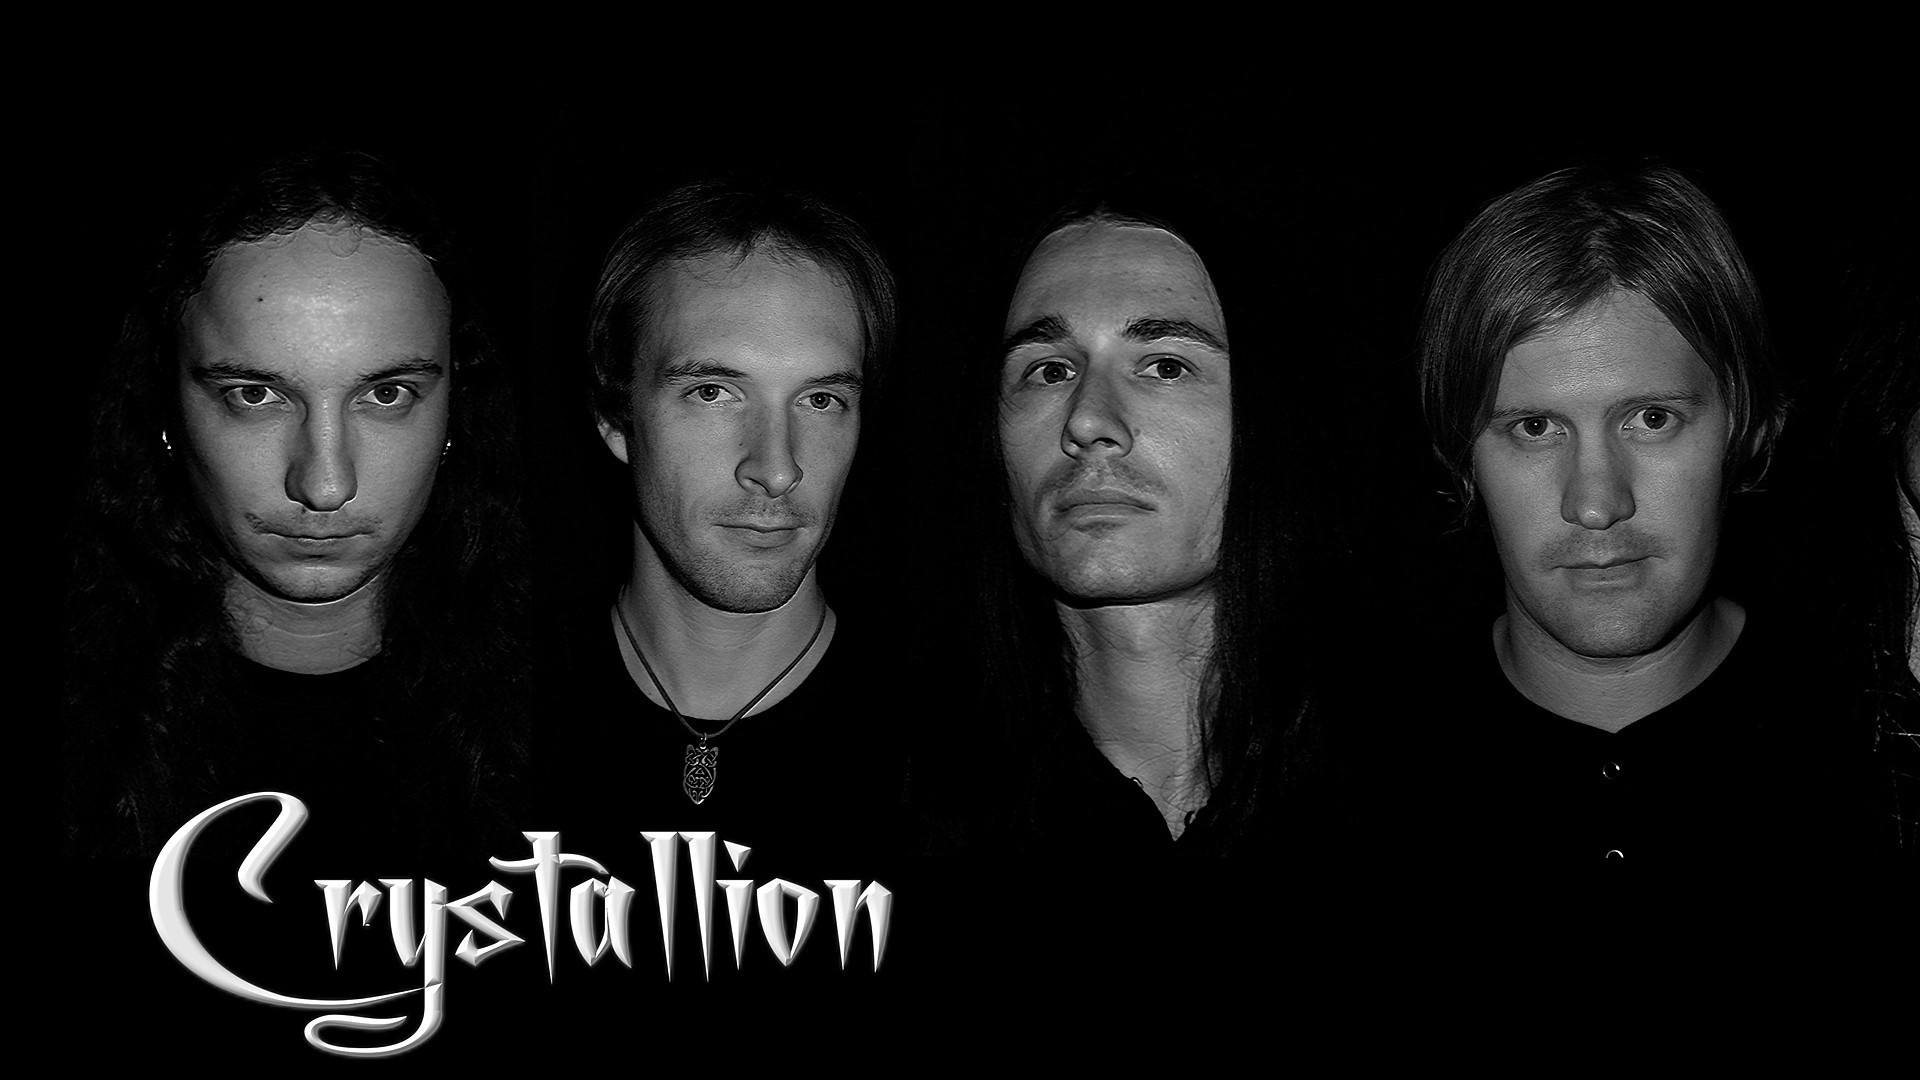 Crystallion Band Faces Members Name